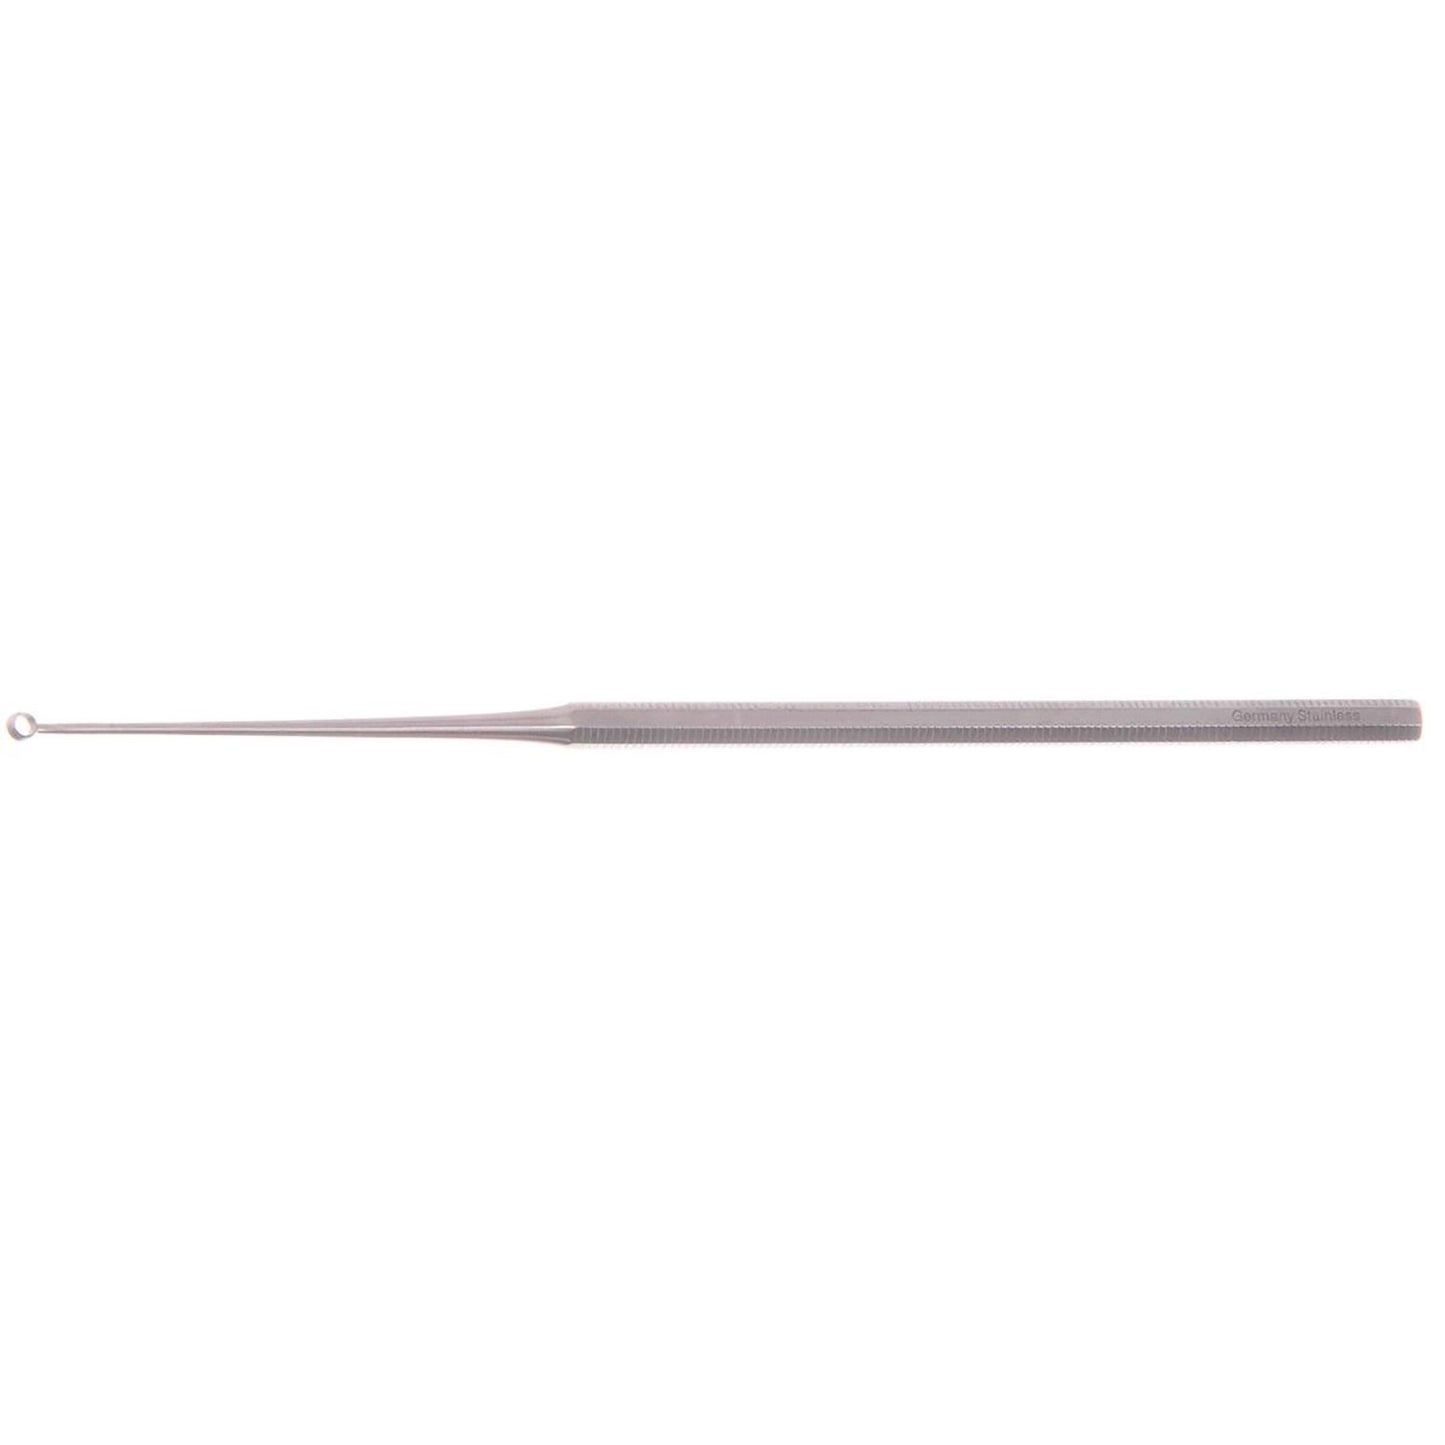 buck-ear-curettes-orthopedic-surgical-instruments